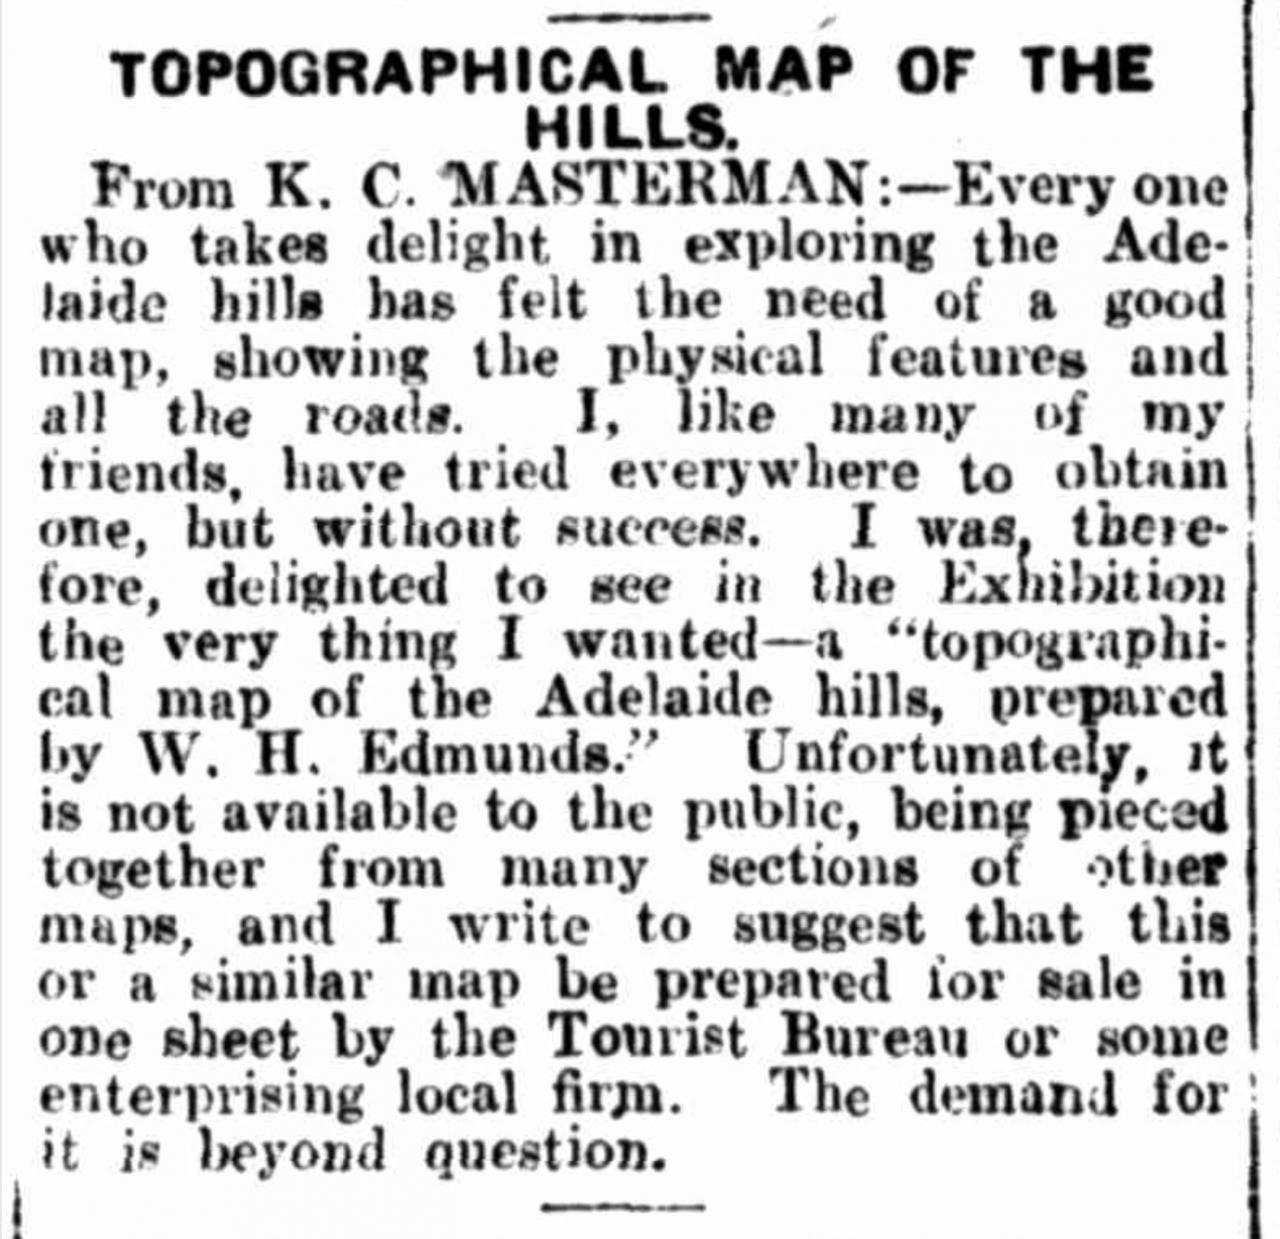 Topographical Map of the Hills. Observer 18 April 1925, NLA: Trove.